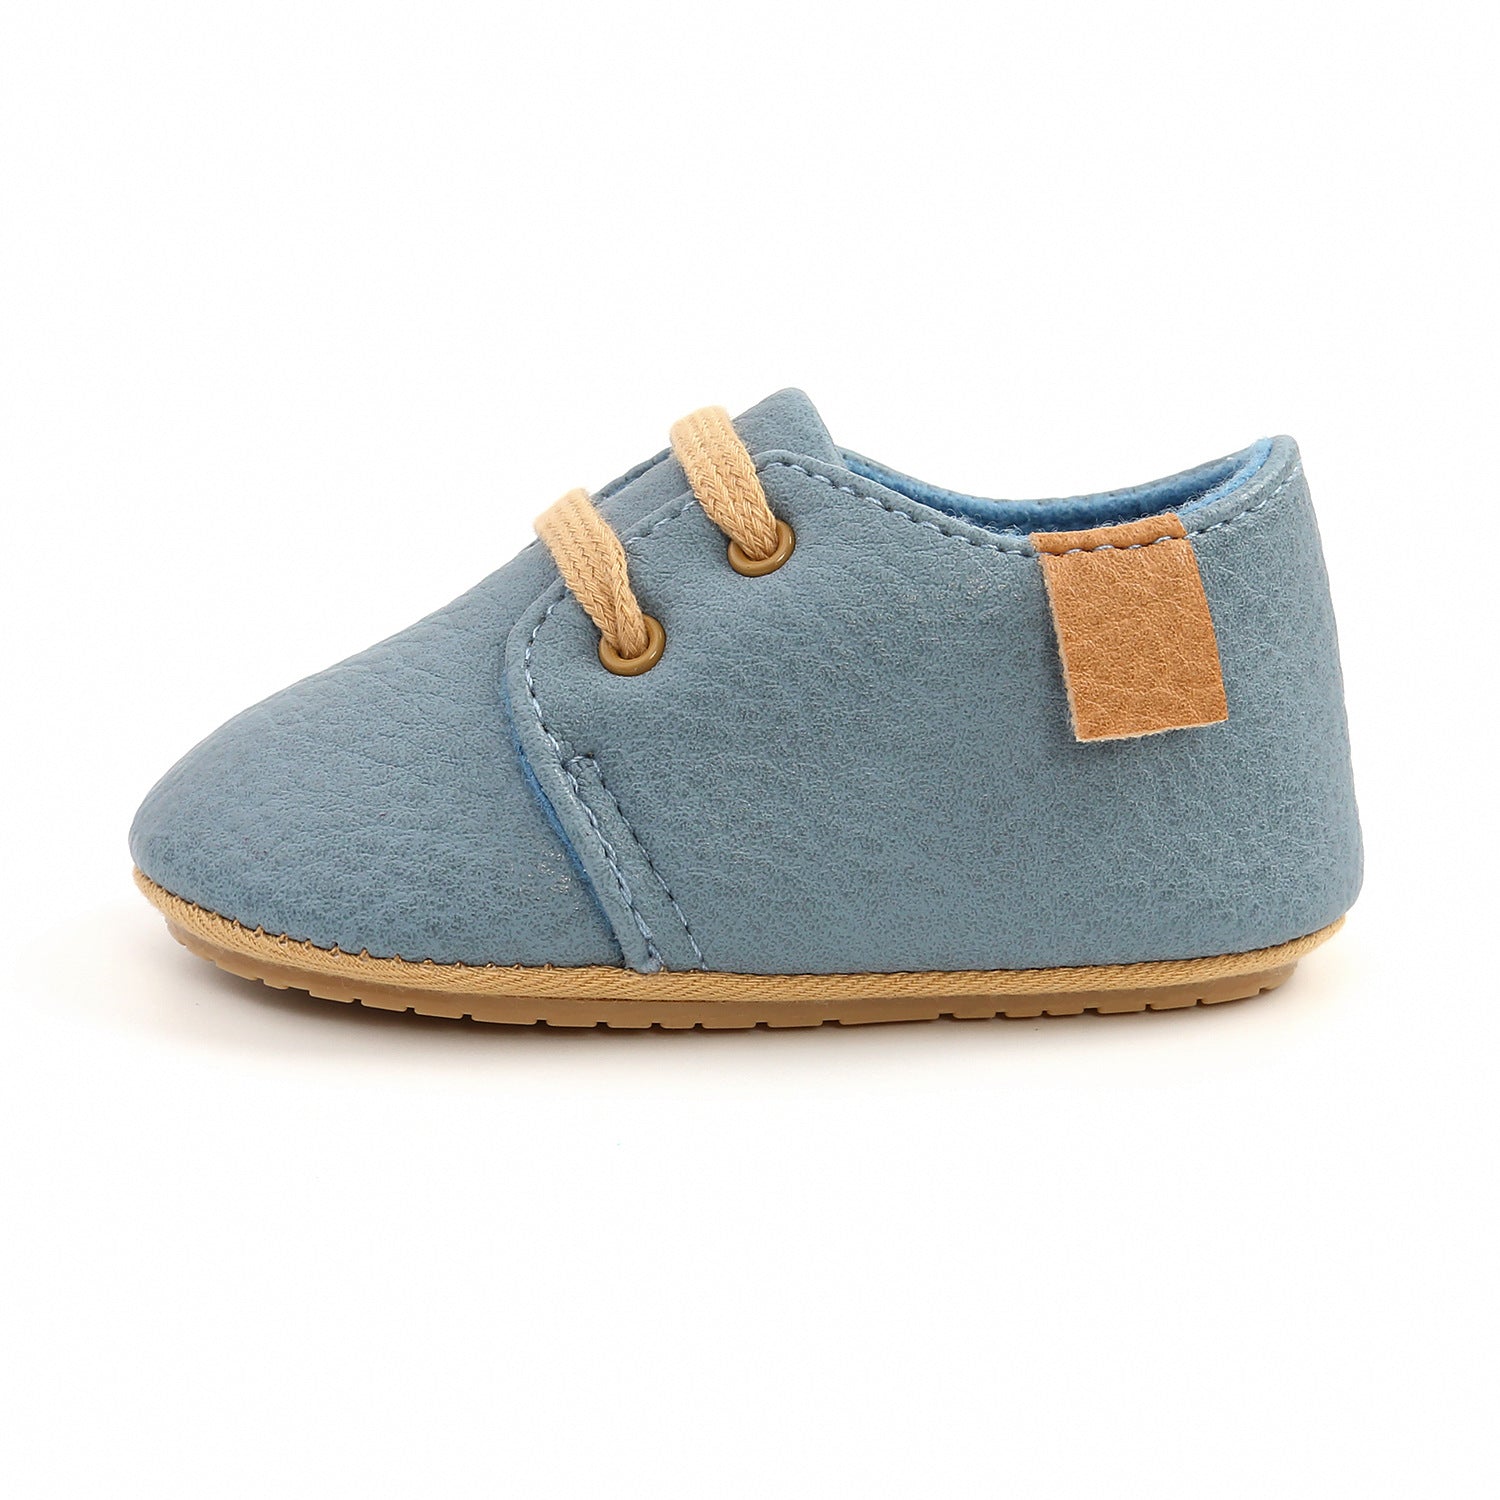 Luxury Soft Leather Baby Moccasins Shoes